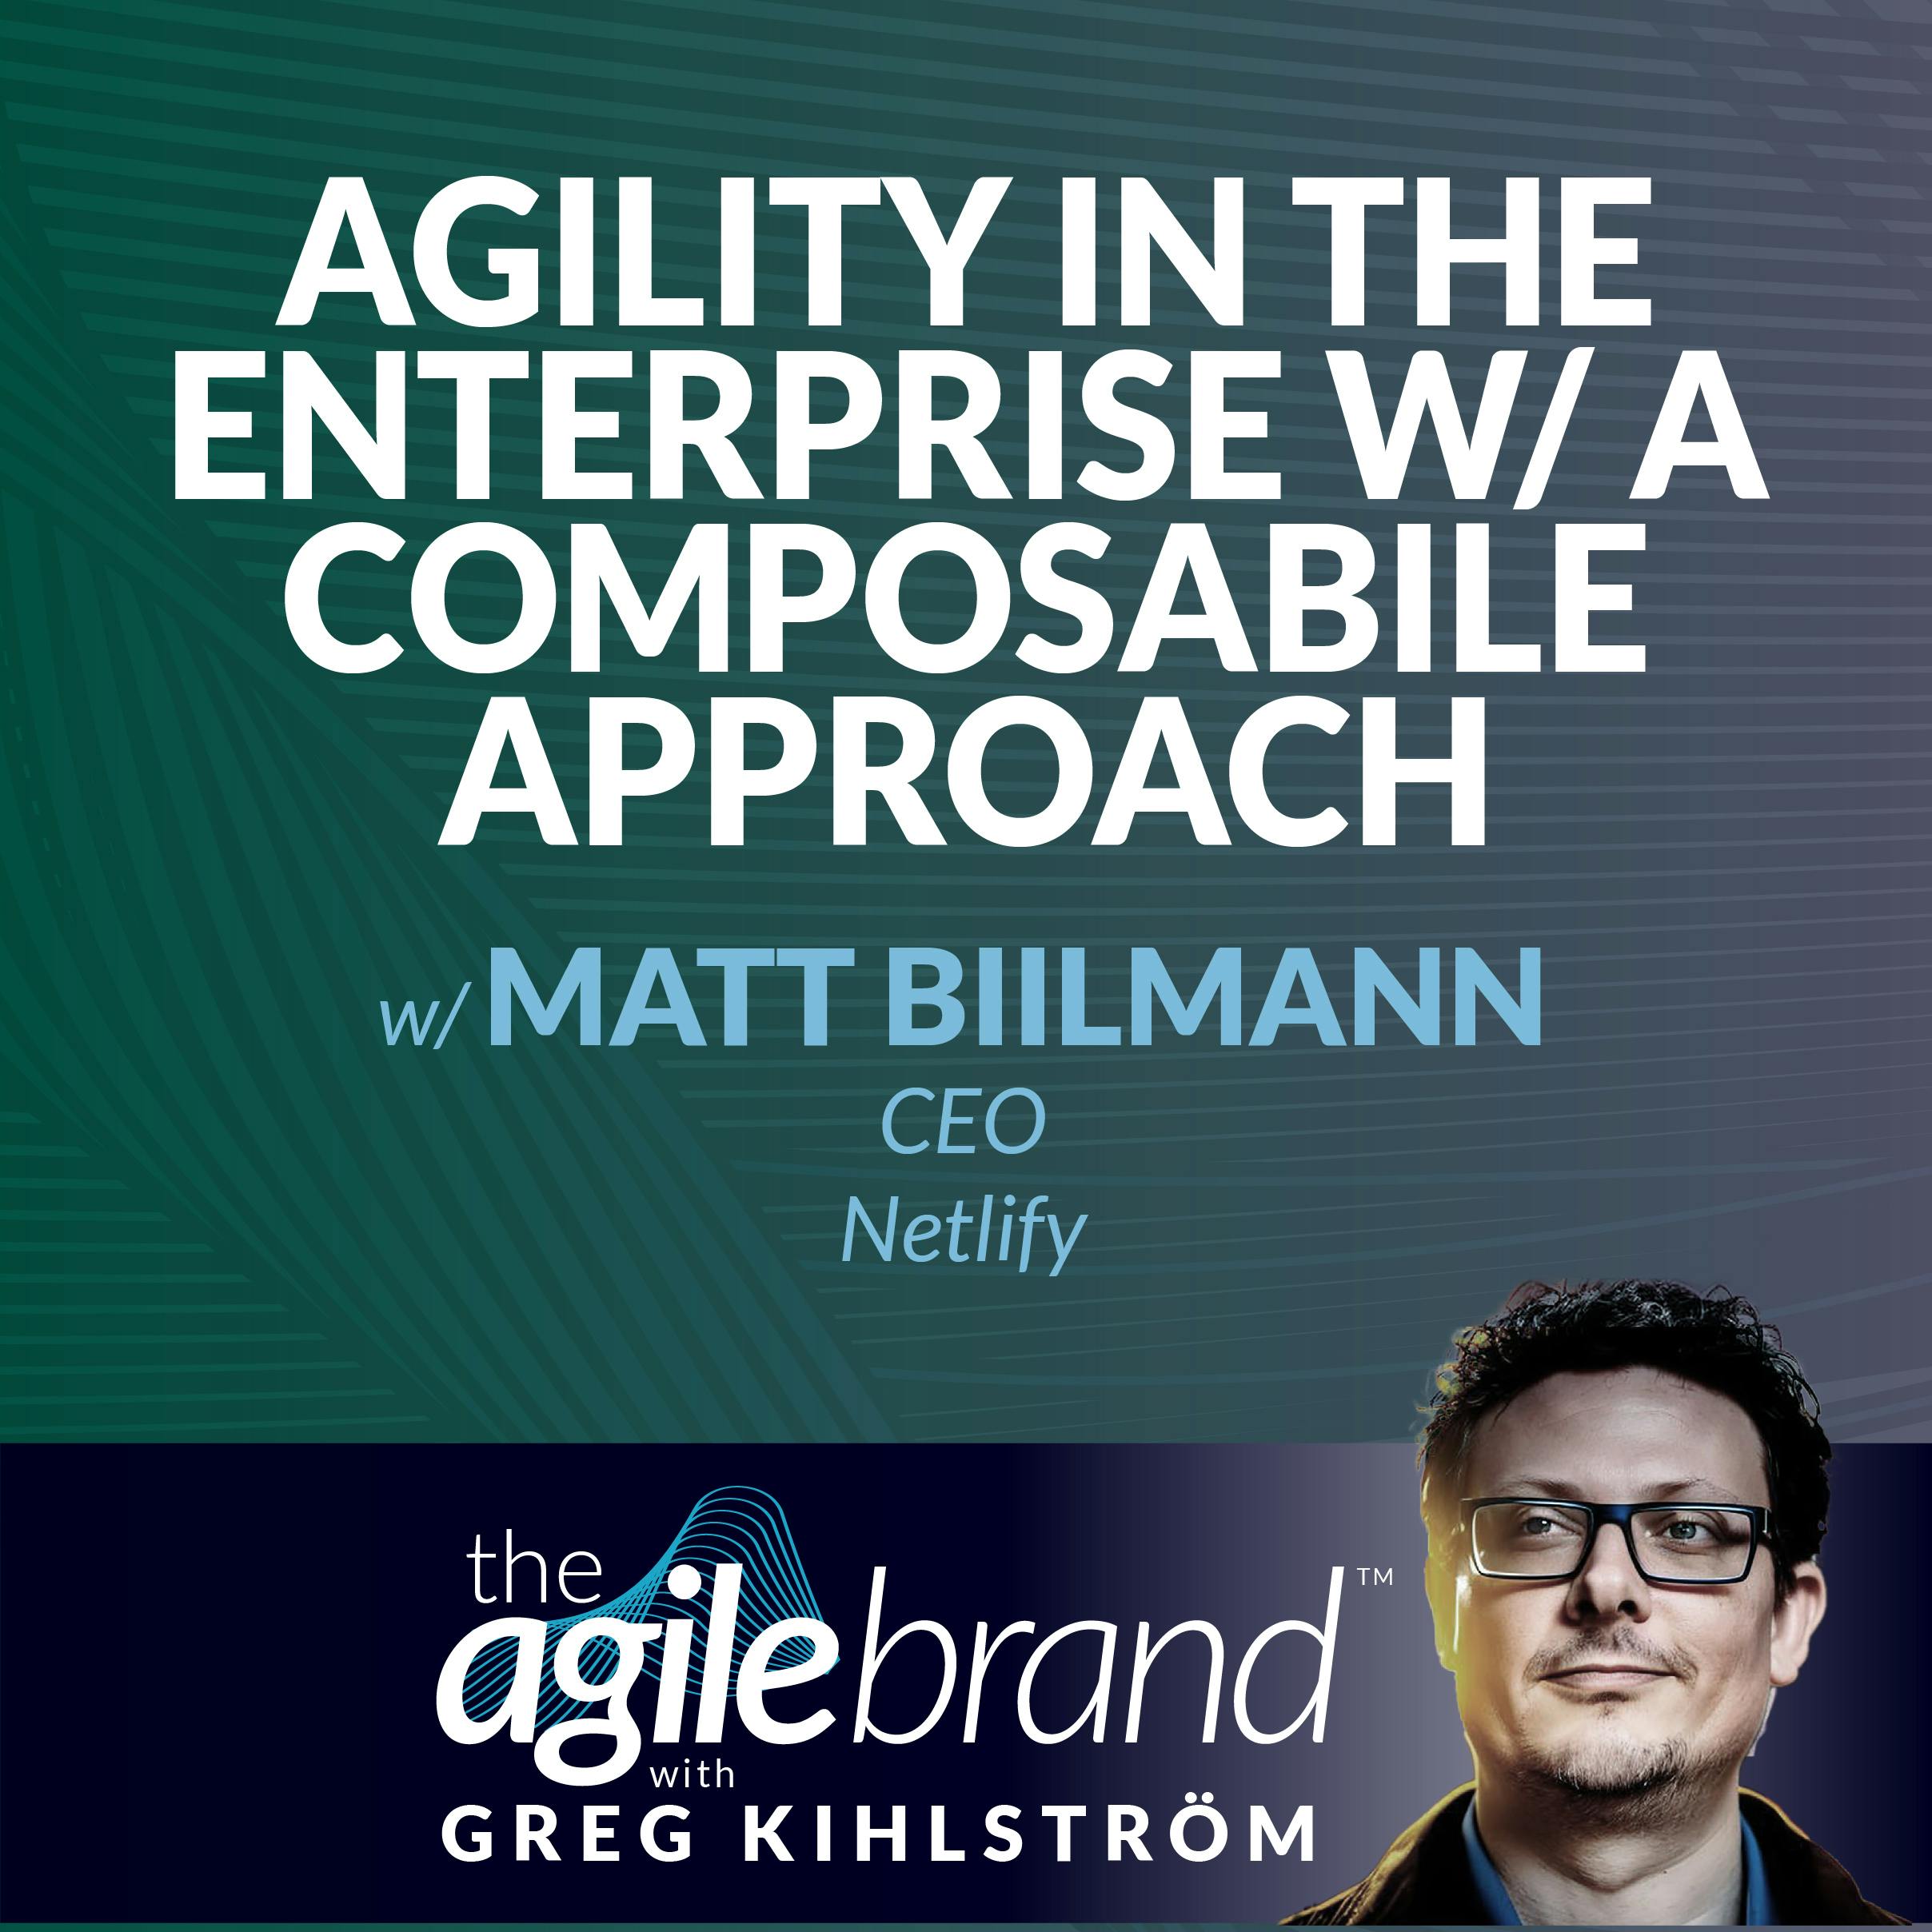 #469: Agility in the enterprise using a composable approach with Matt Biilmann, CEO of Netlify